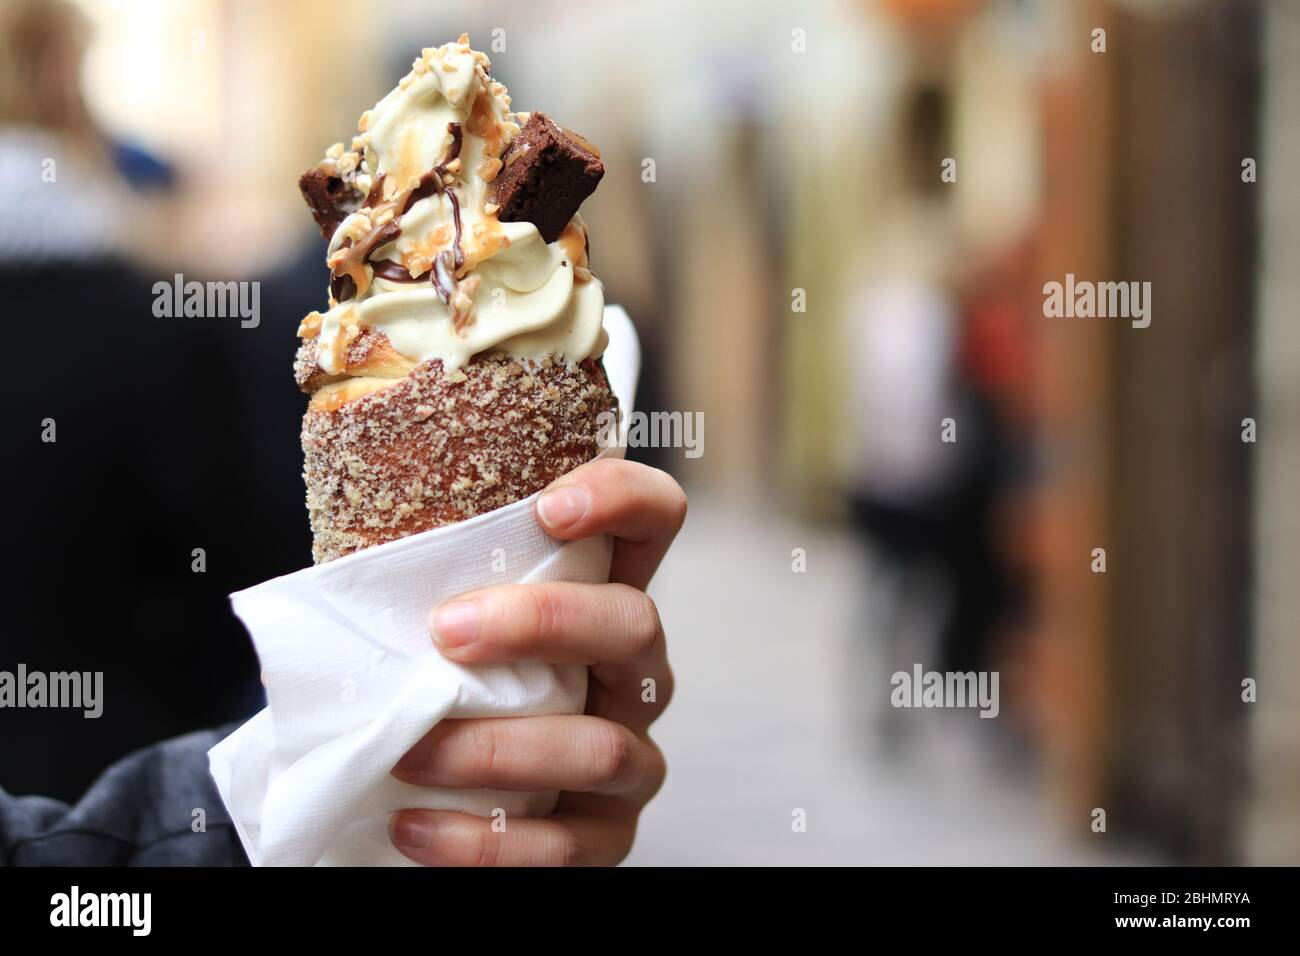 Trdelnik traditional Czech pastry dessert, Prague, Czech Republic,Rolled and grilled pasteries Stock Photo